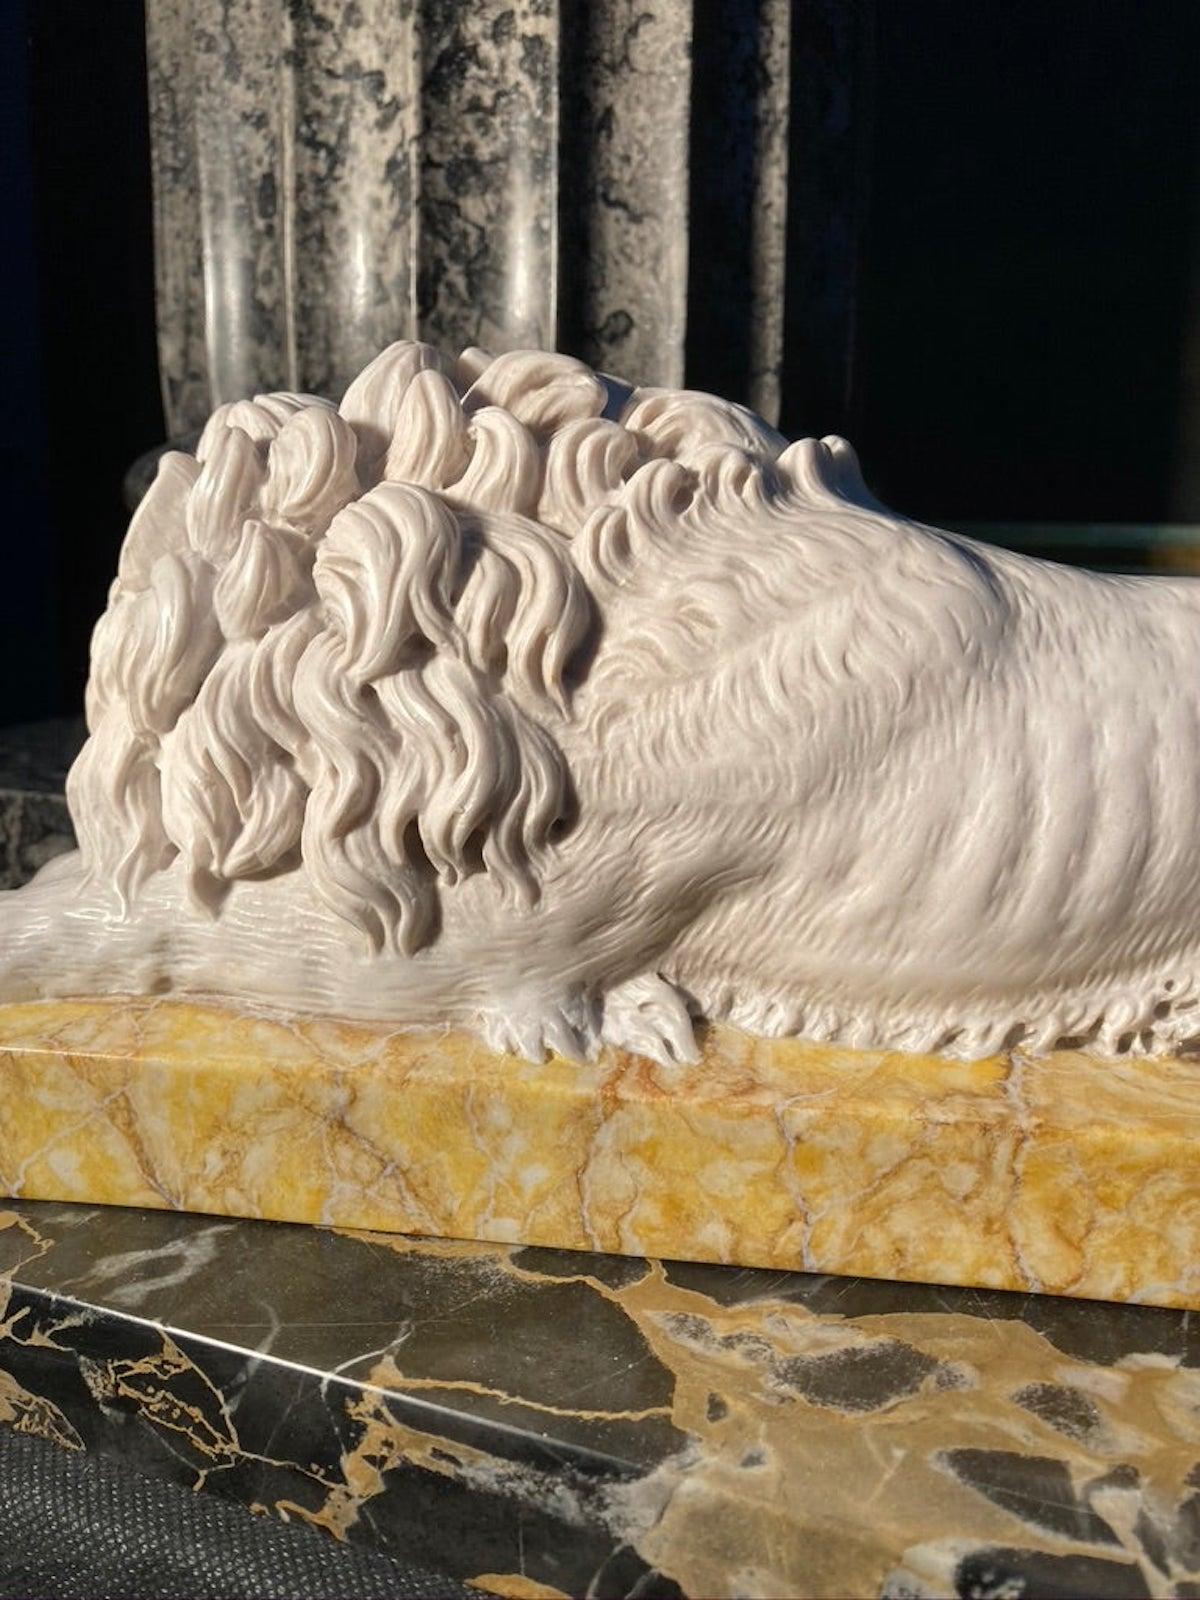 Chatsworth Marble Sculptured Lions on Sienna, 20th Century 

The Chatsworth Lions, a pair.

A finely finished pair of the famous lions, in polished Carrara marble and set upon Sienna bases. The famous marble Lions were originally made by the